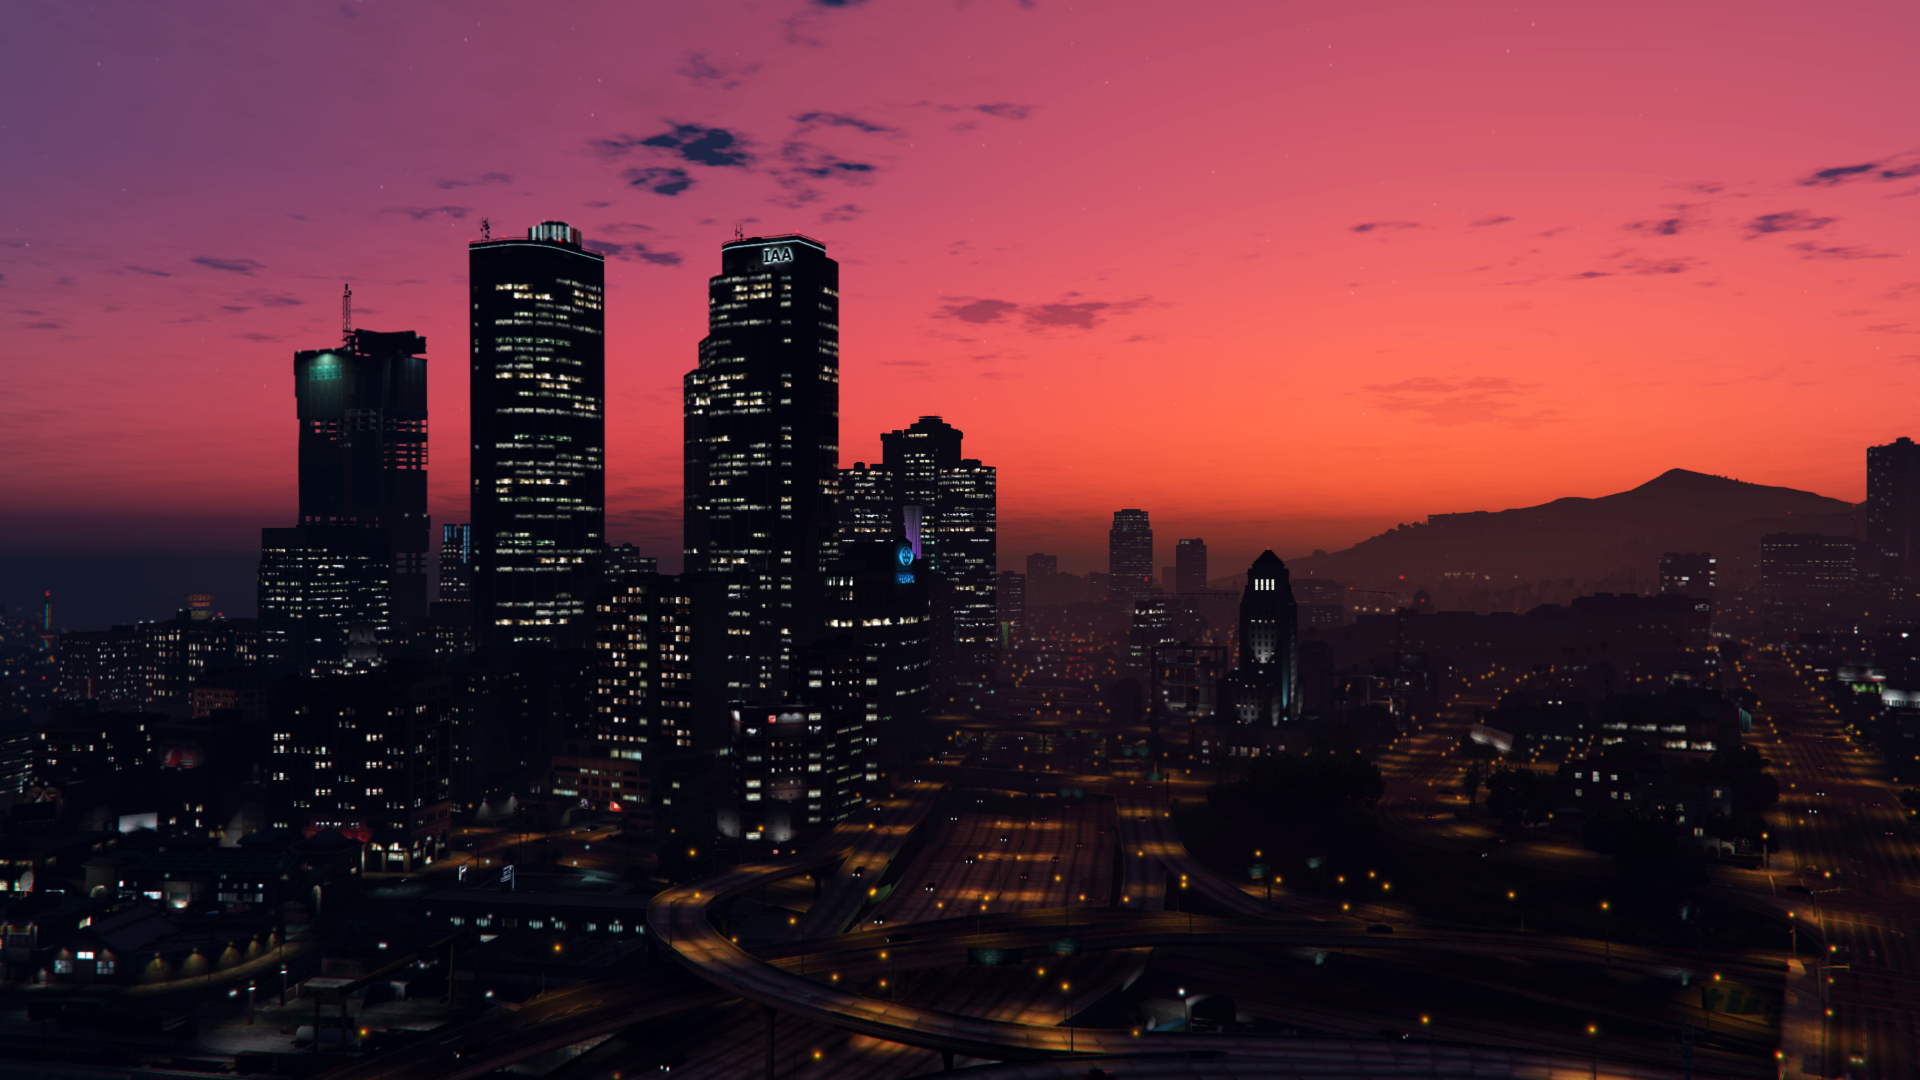 General 1920x1080 Grand Theft Auto V sky video games screen shot PC gaming cityscape